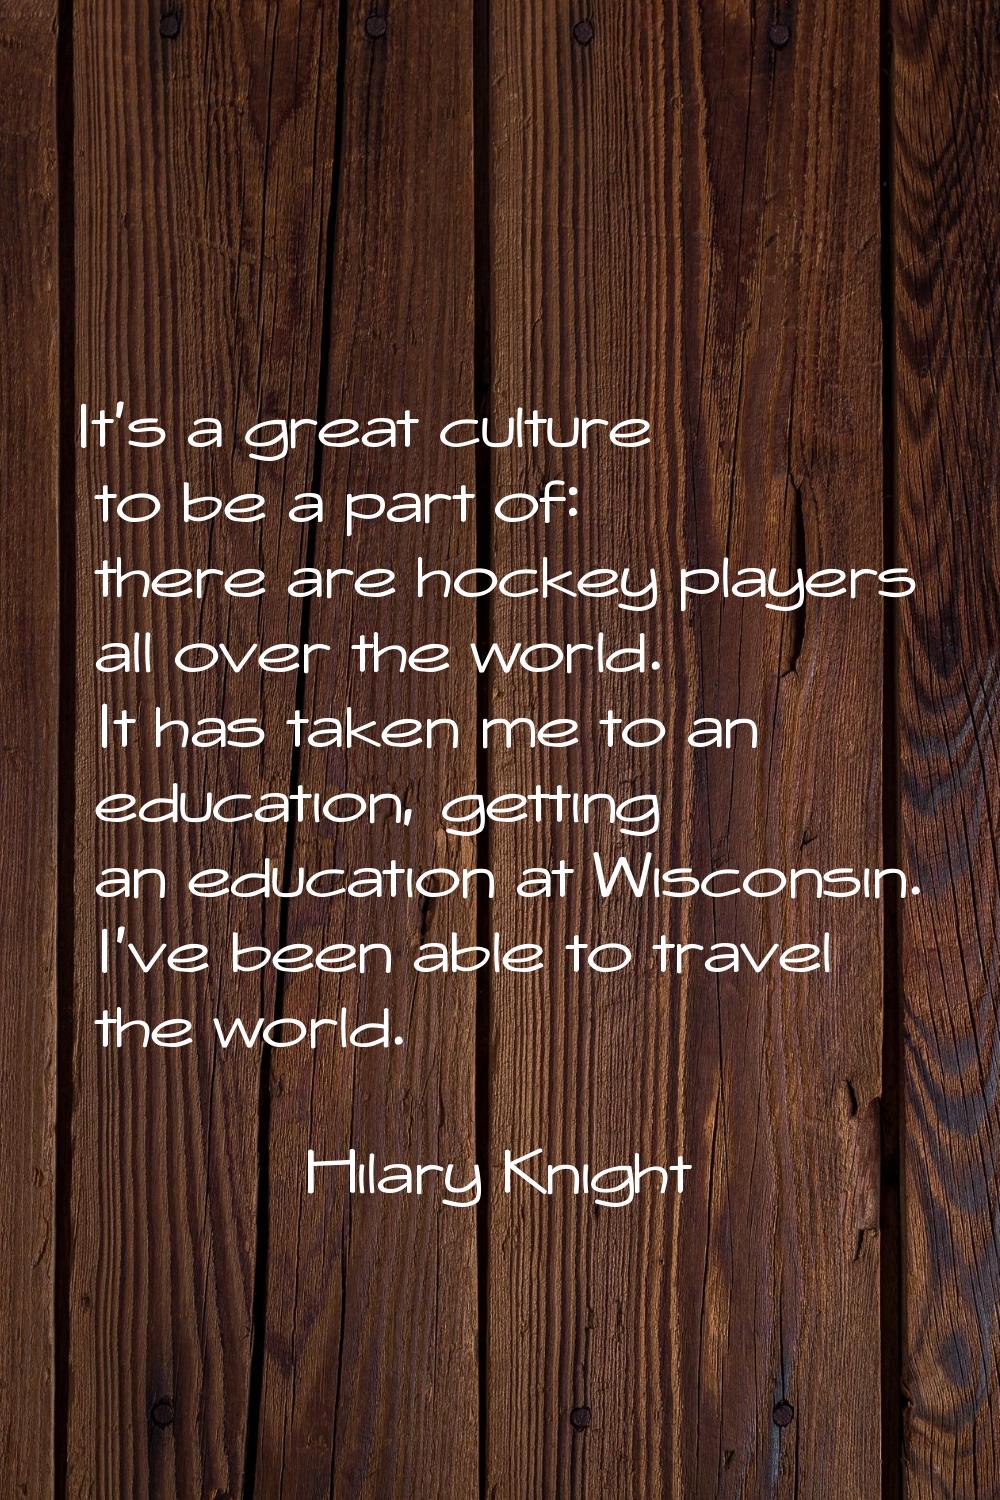 It's a great culture to be a part of: there are hockey players all over the world. It has taken me 